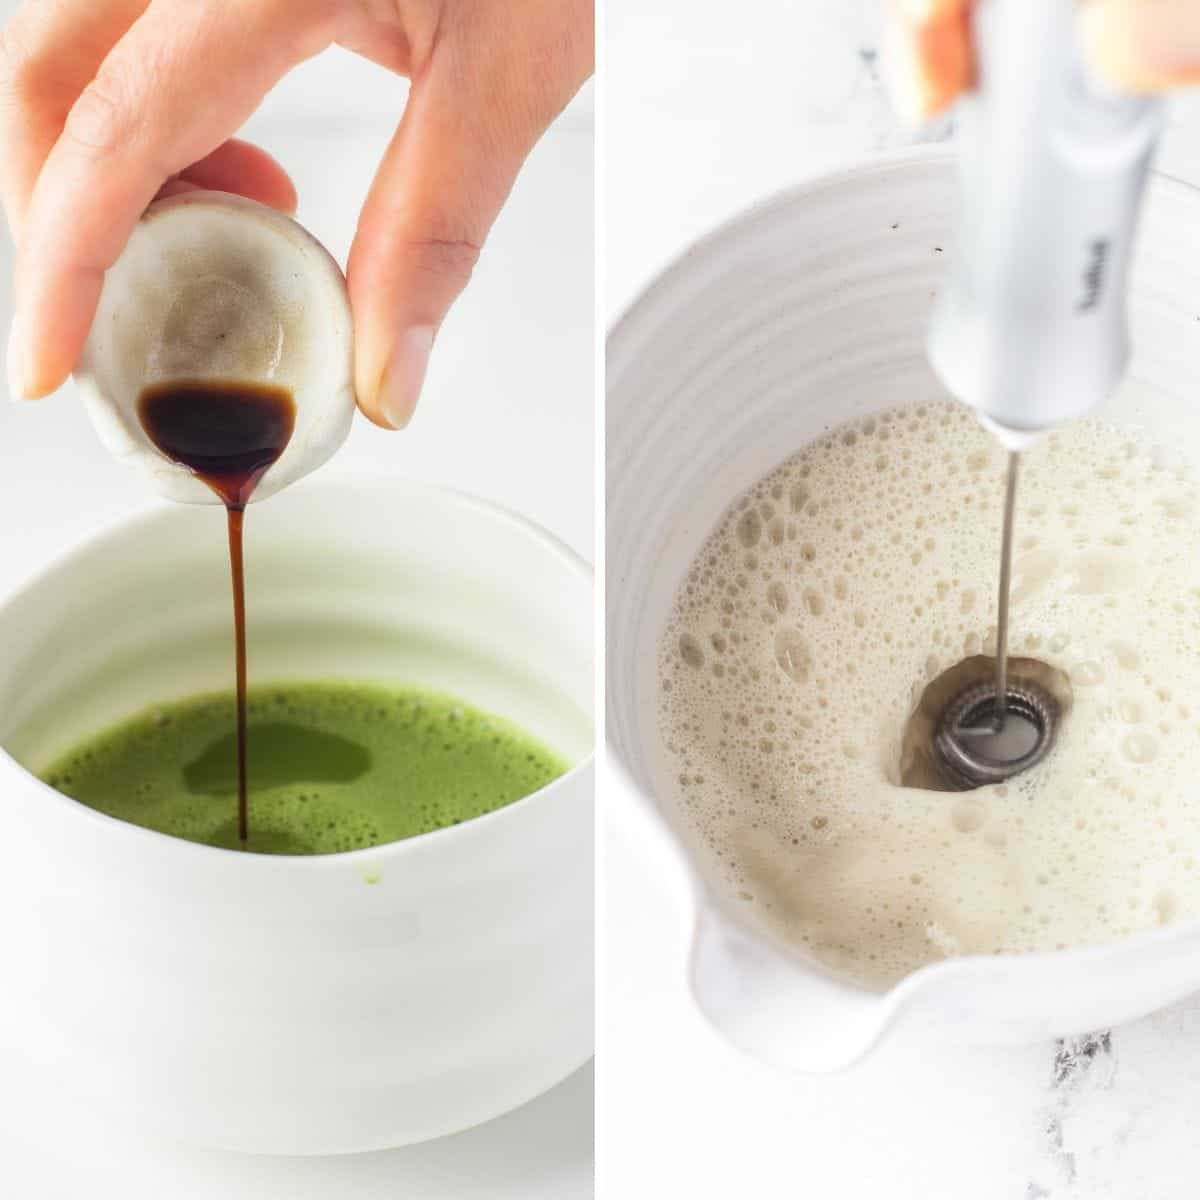 Collage of 2 images showing how to add flavoring to the matcha, and froth the milk with an electric frother